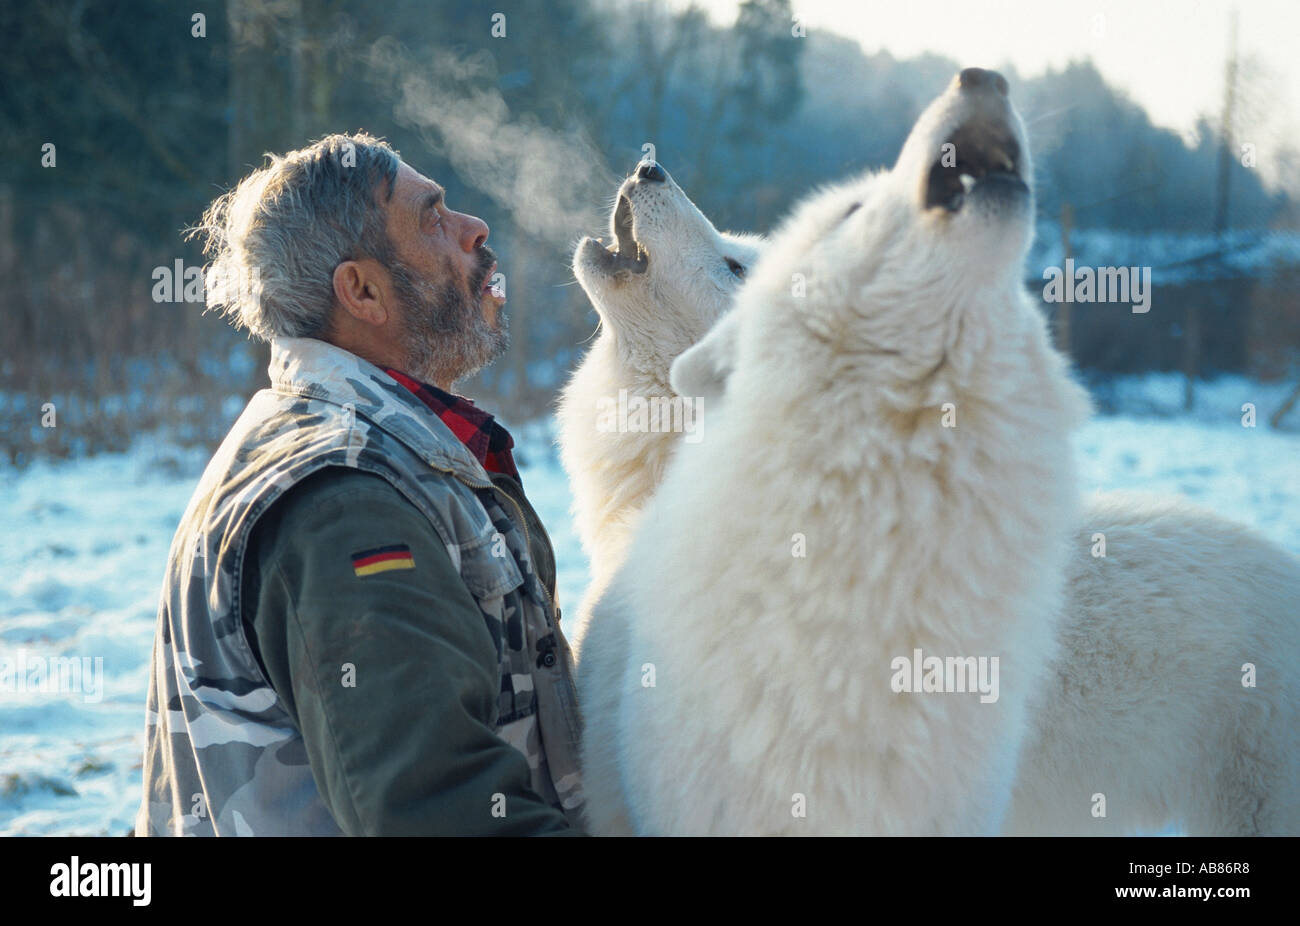 arctic wolf, tundra wolf (Canis lupus albus), Werner Freund howling with wolves, Germany, Saarland, Merzig Stock Photo